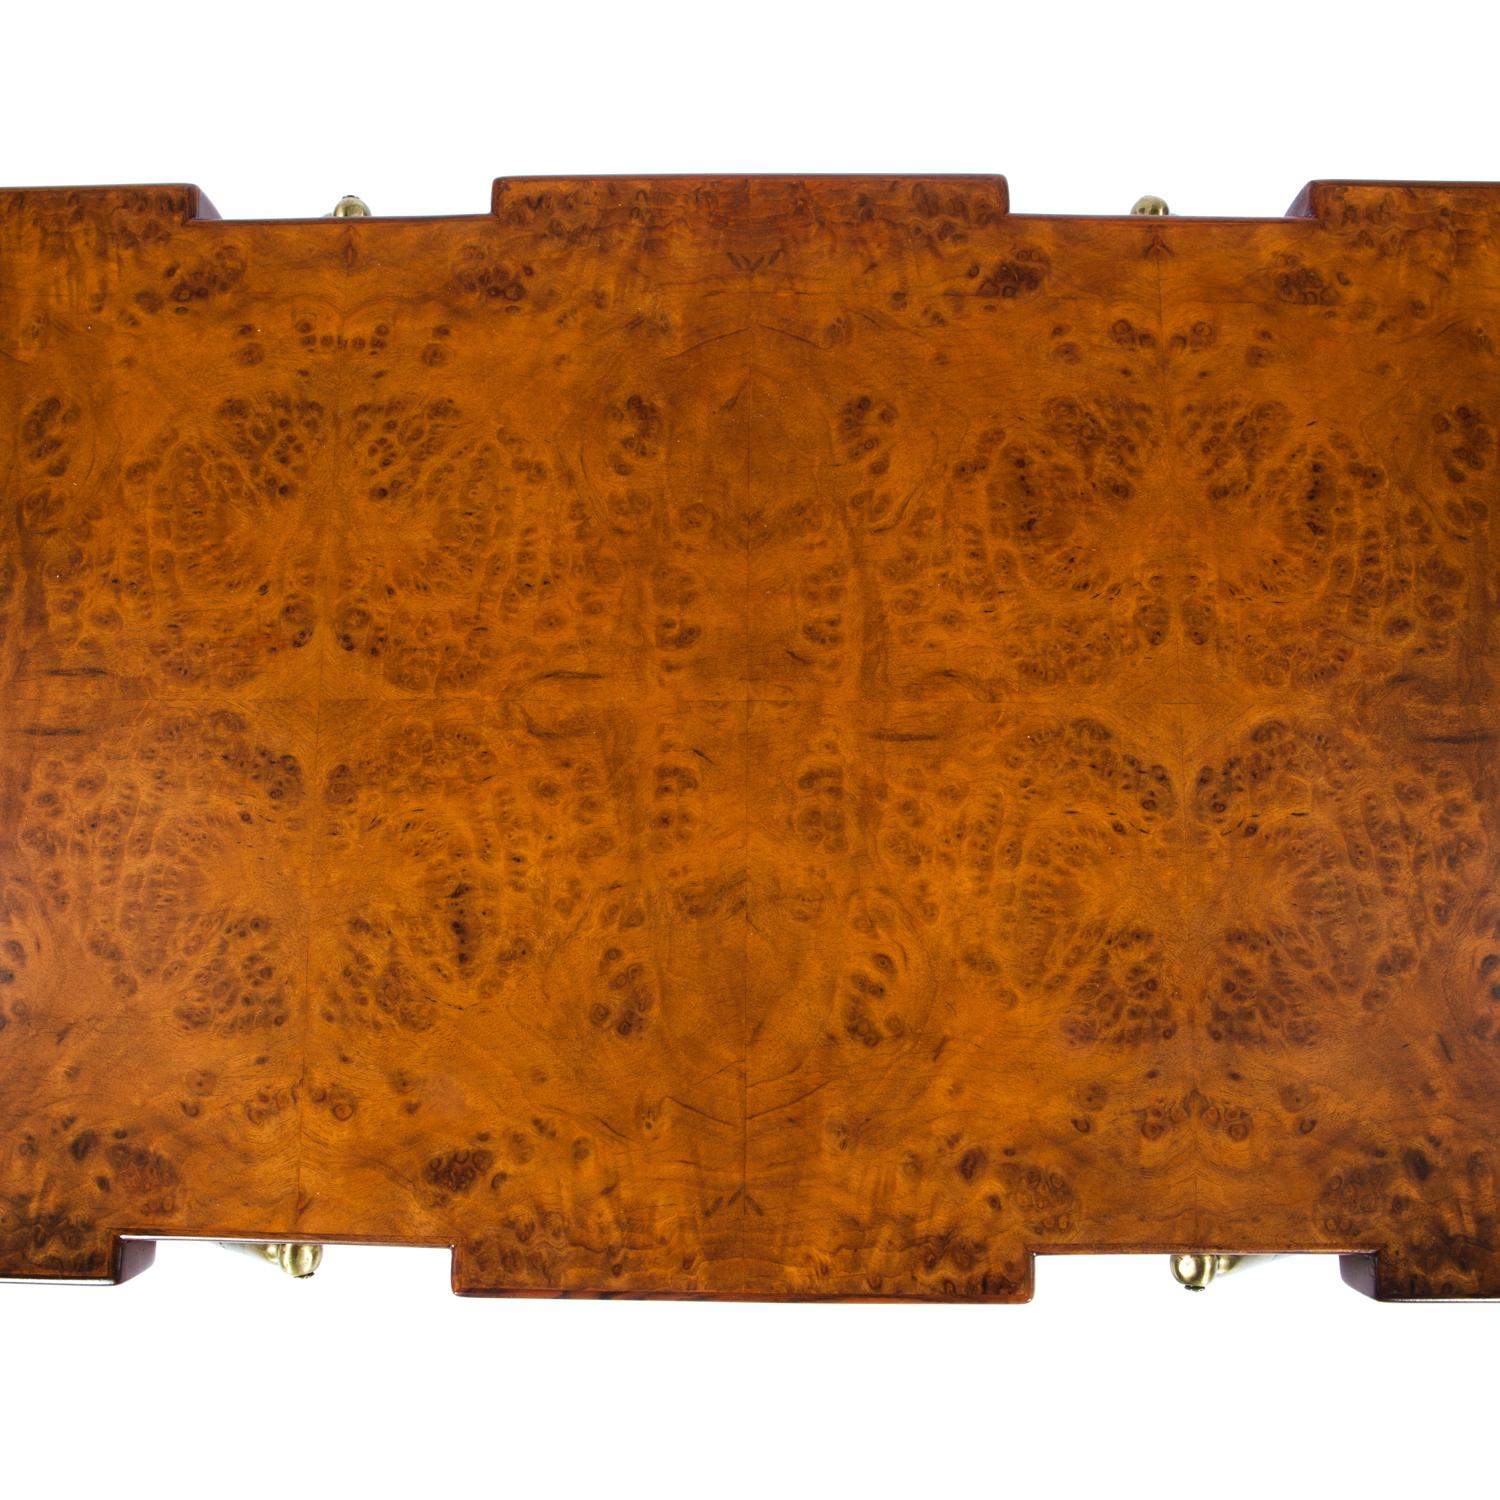 Hand-Crafted Ico Parisi Sculptural Coffee Table in Burled Walnut with Brass Fittings, 1950s